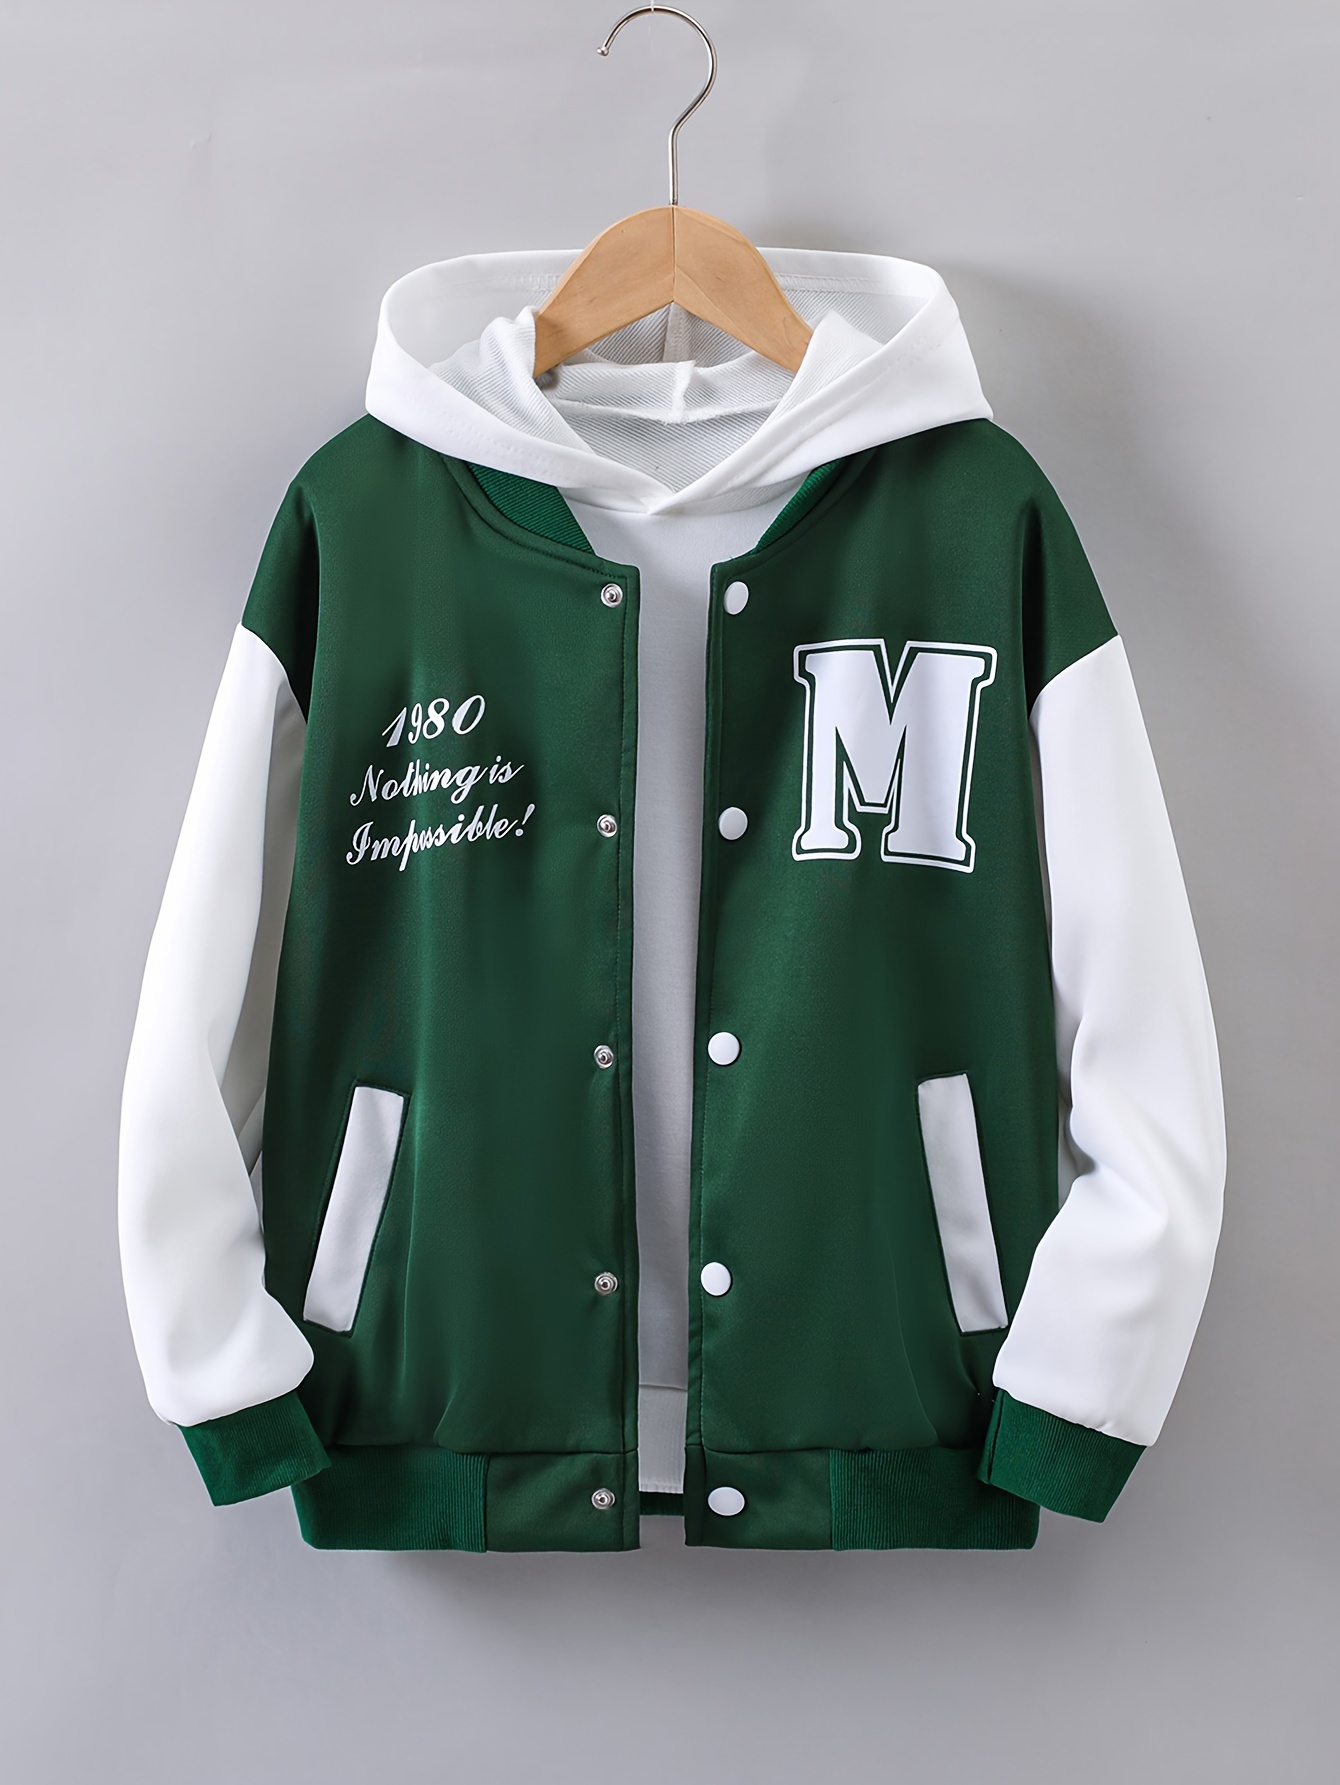 Teen Girls Letter Patched Varsity Jacket,8-9Y